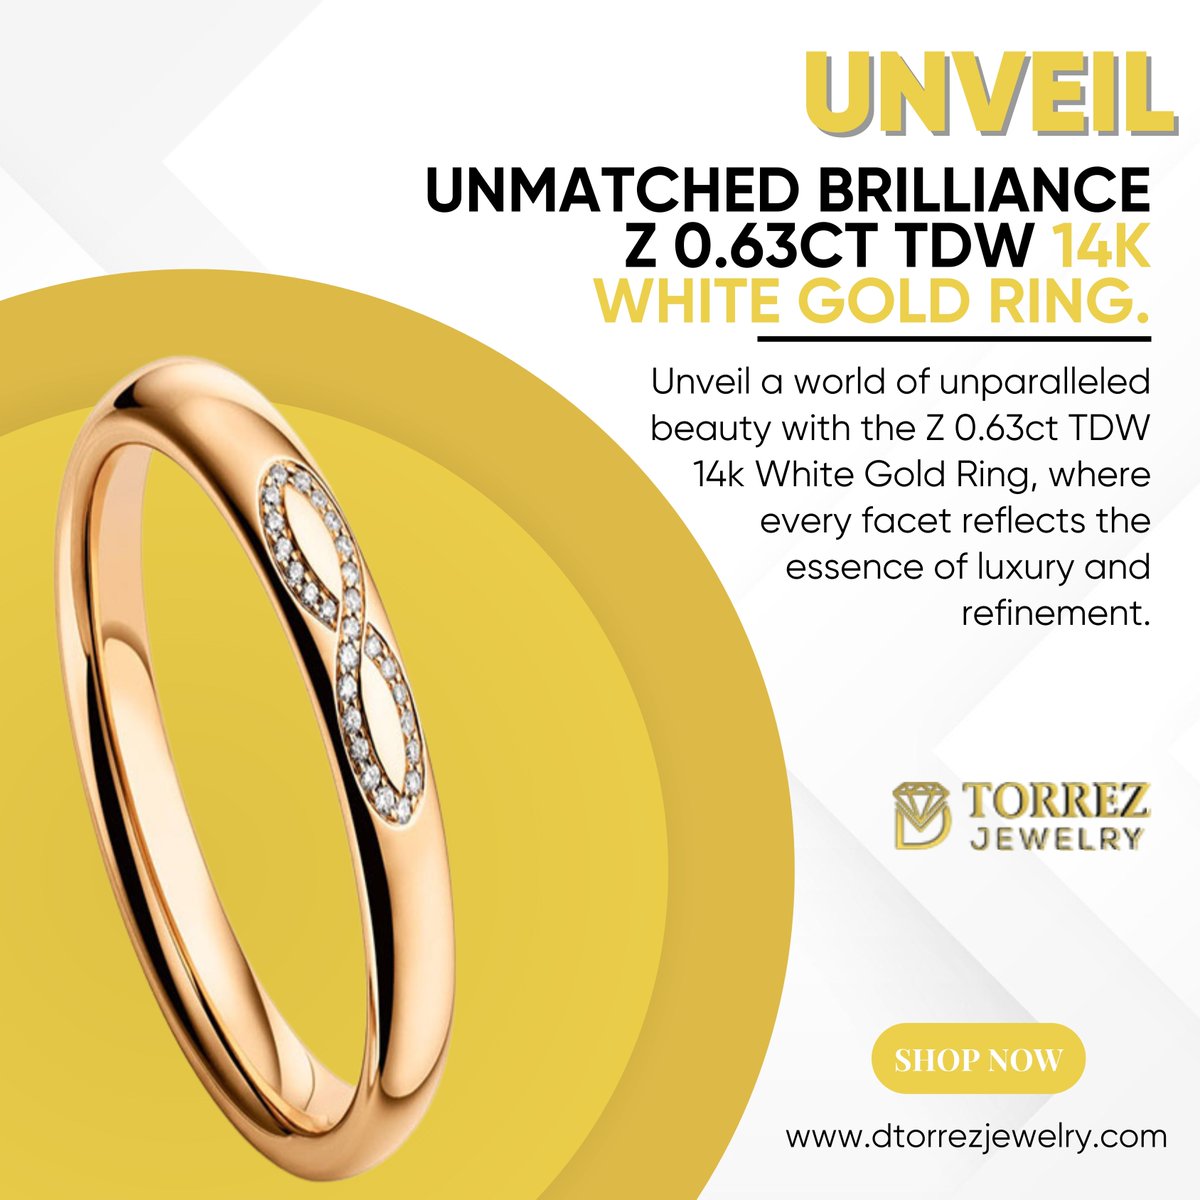 Unveil a world of unparalleled beauty with the Z 0.63ct TDW 14k White Gold Ring, where every facet reflects the essence of luxury and refinement.

#zring #luxuryjewelry #whitegold #diamonds #sophisticatedstyle #highquality #finejewelry #exquisitedesign #luxuryfashion